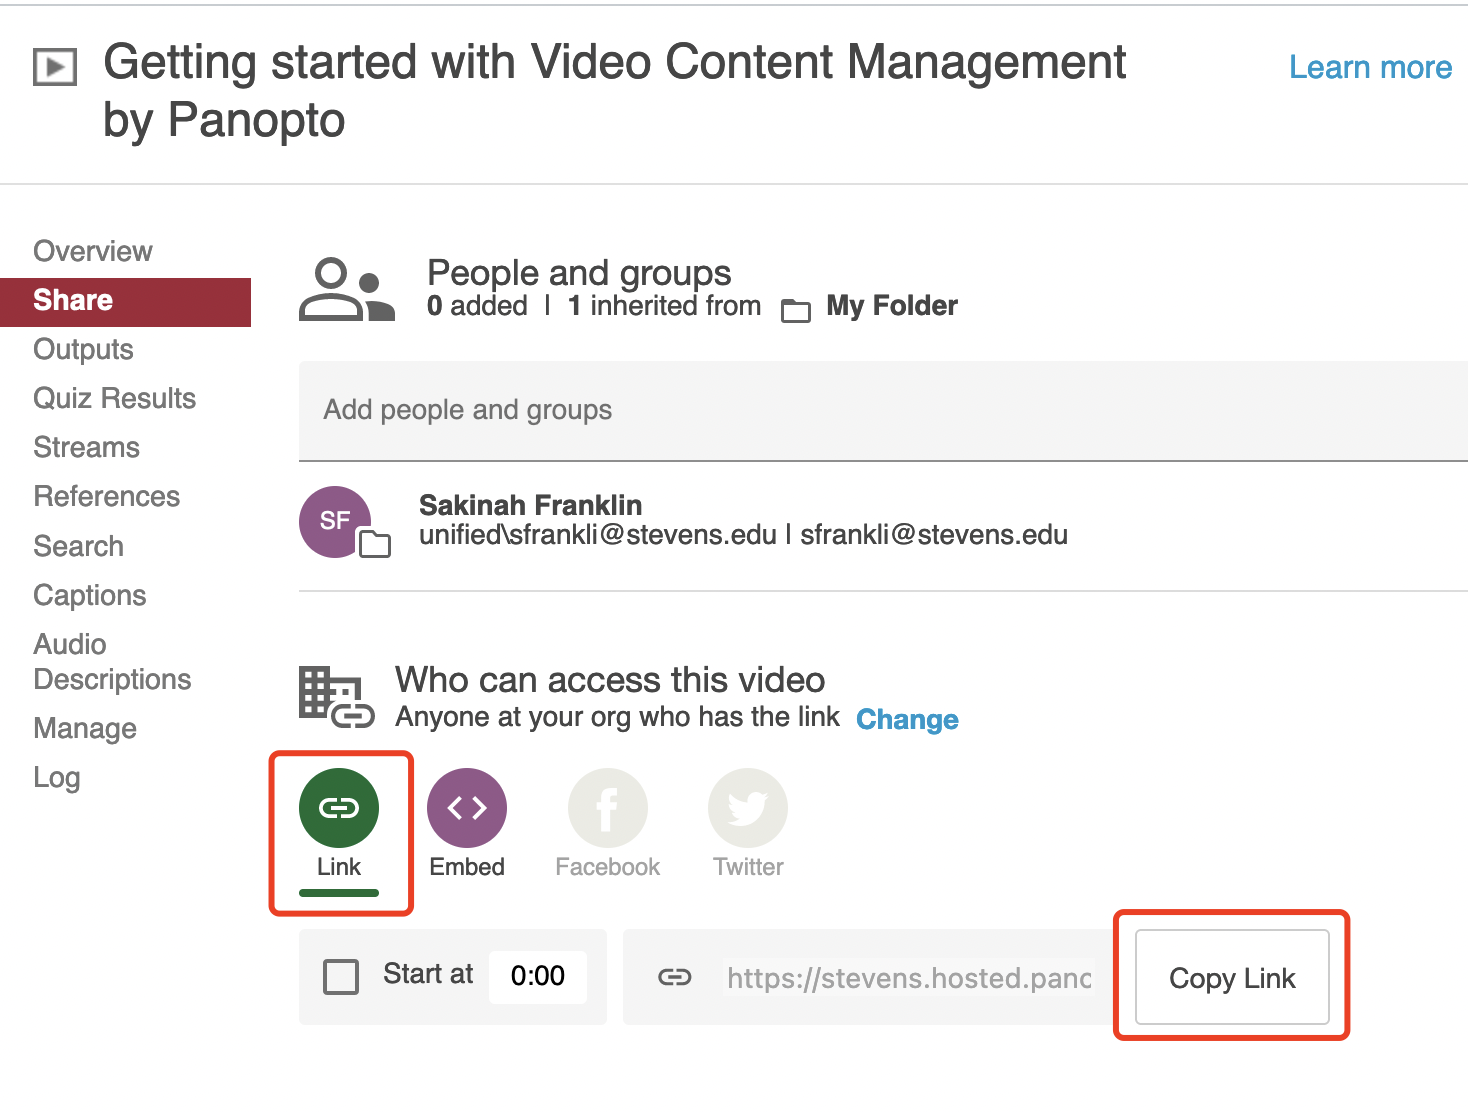 Panopto video share settings with the link option and copy link buttons highlighted